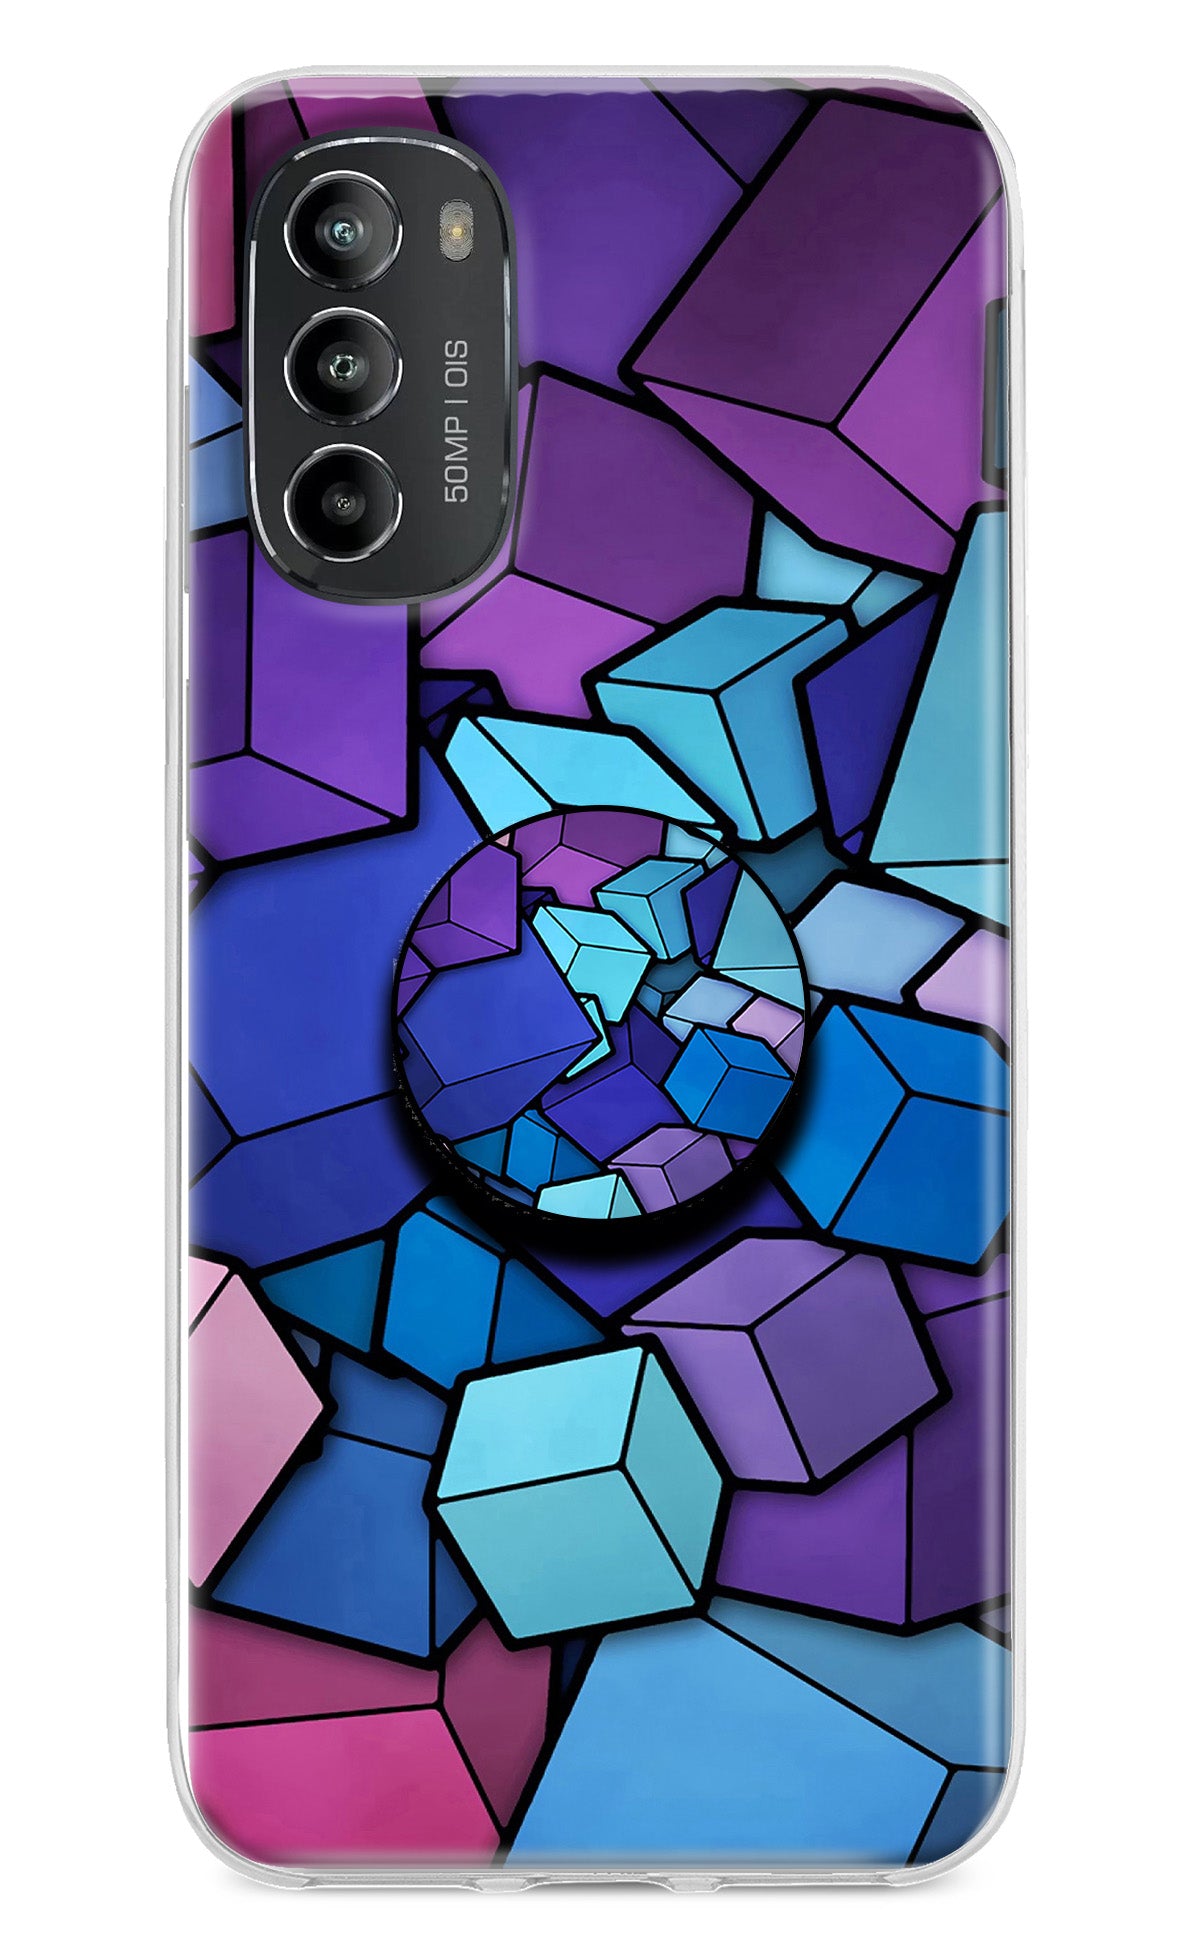 Cubic Abstract Moto G82 5G Pop Case